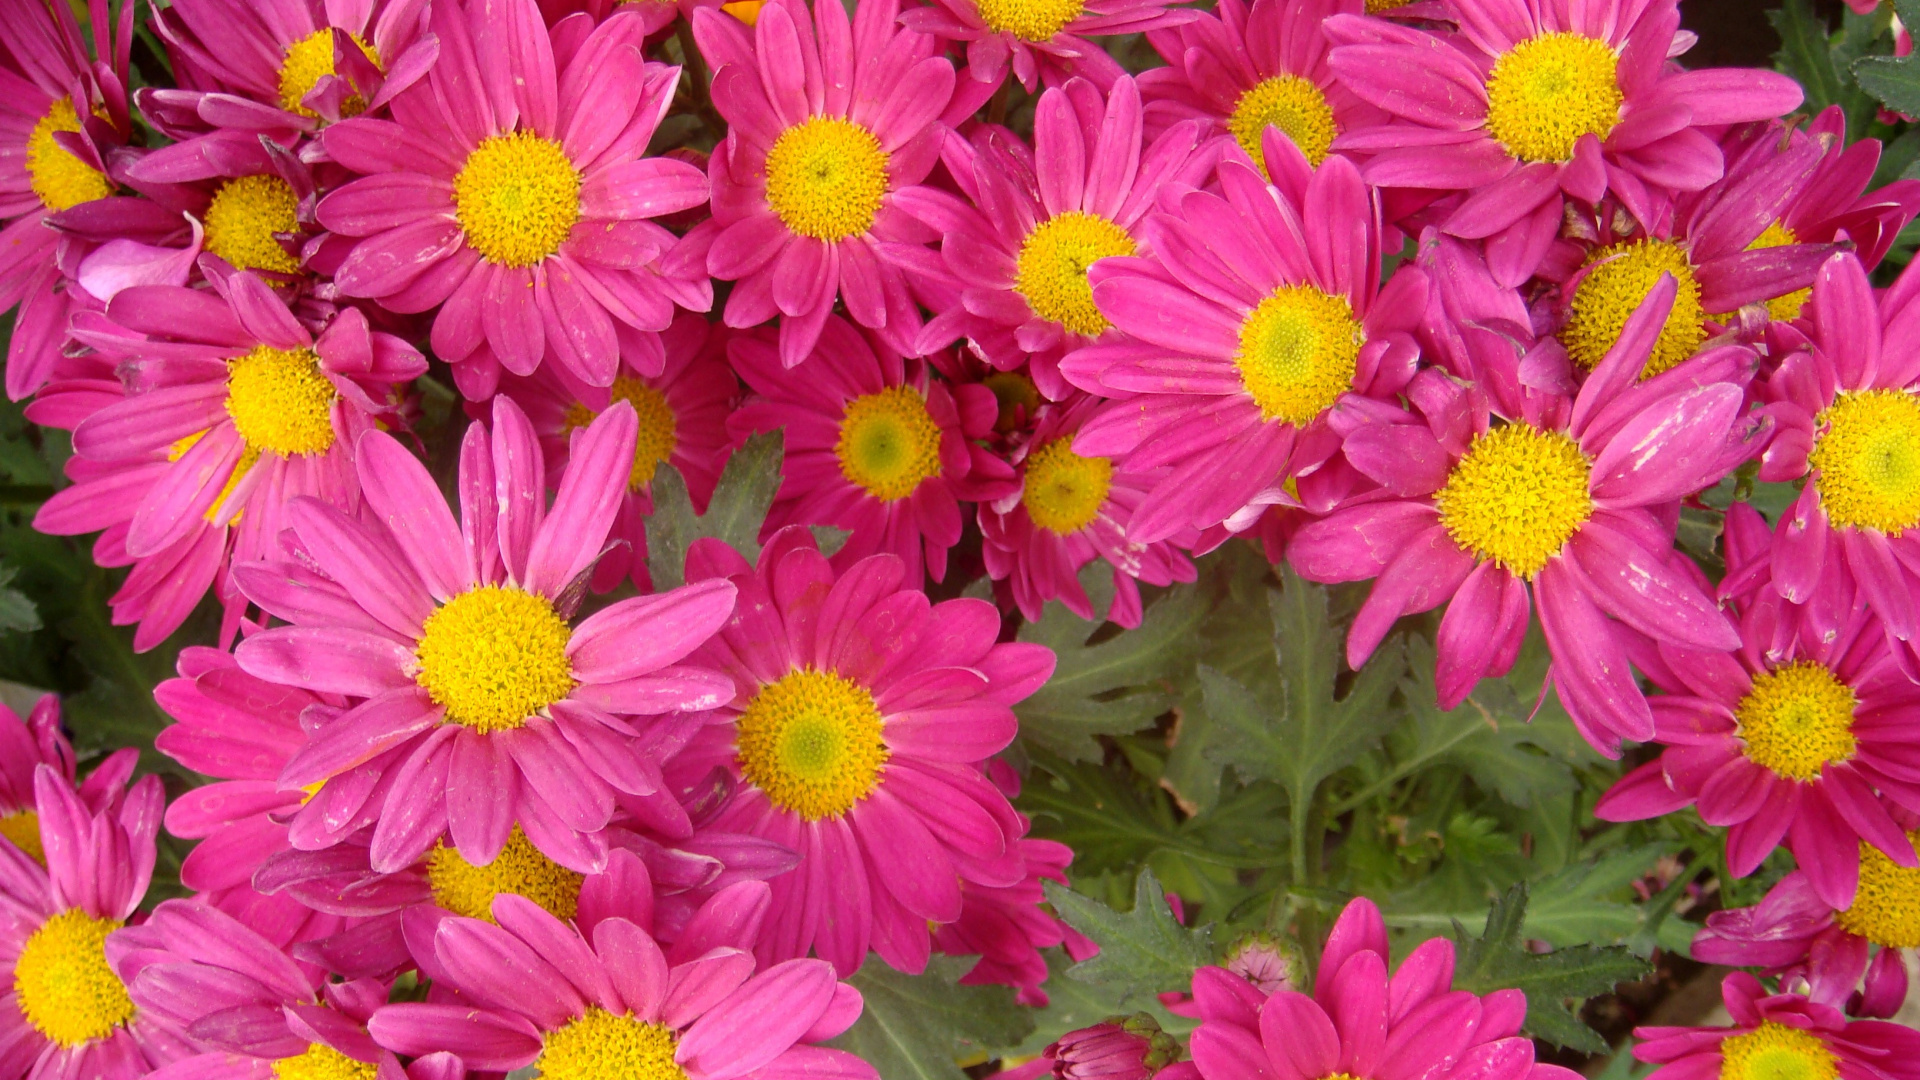 Pink Flowers With Green Leaves. Wallpaper in 1920x1080 Resolution